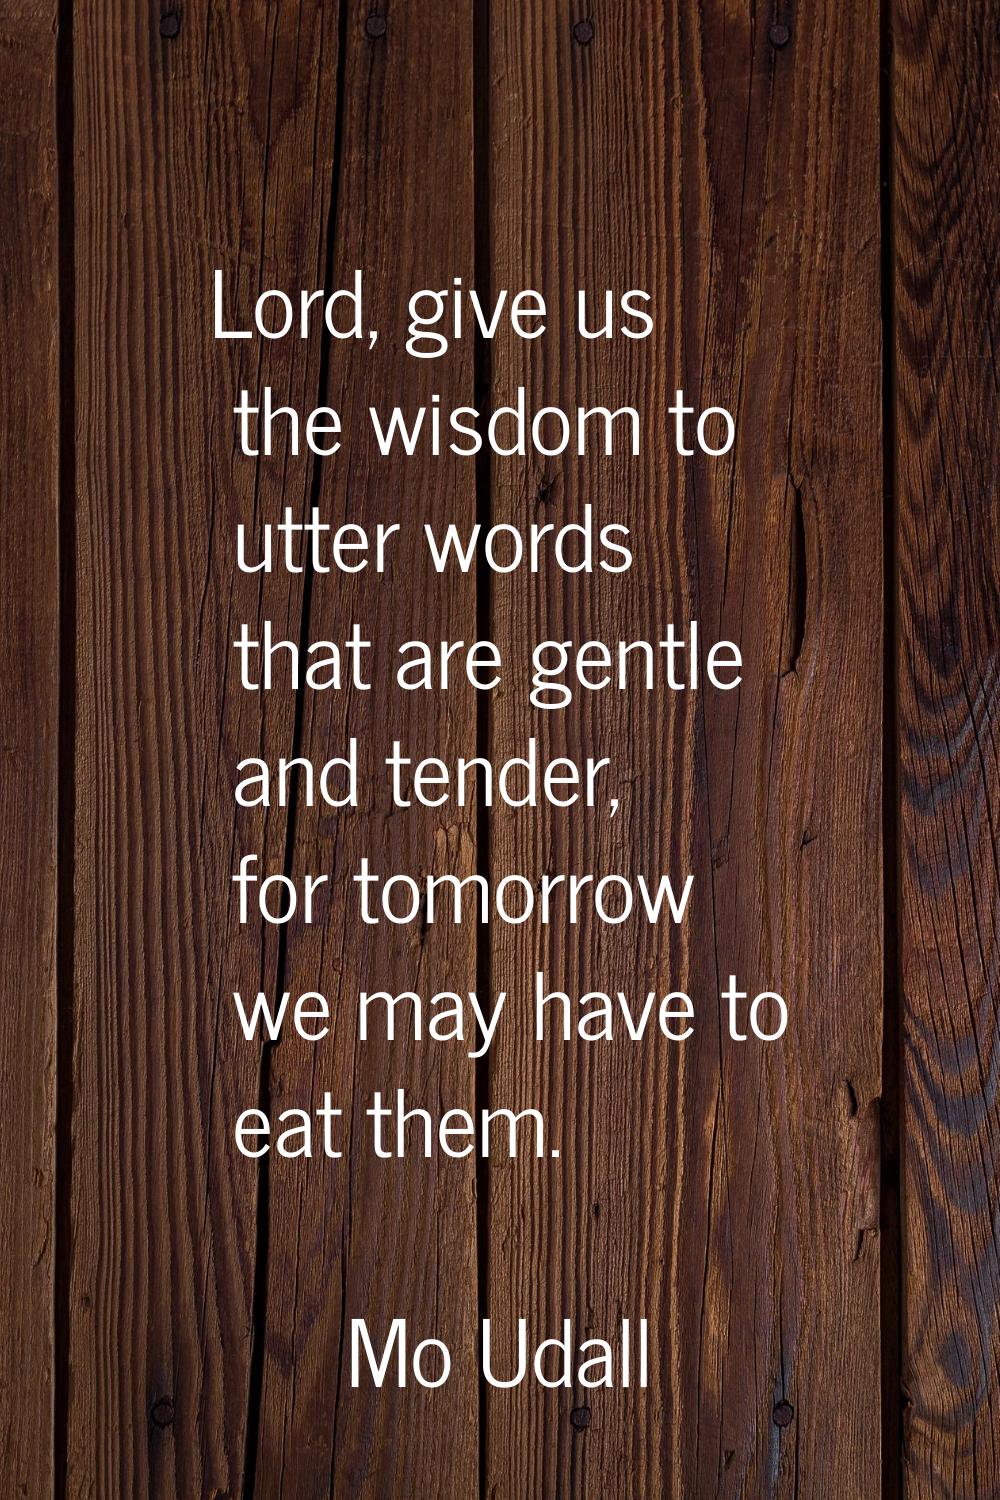 Lord, give us the wisdom to utter words that are gentle and tender, for tomorrow we may have to eat